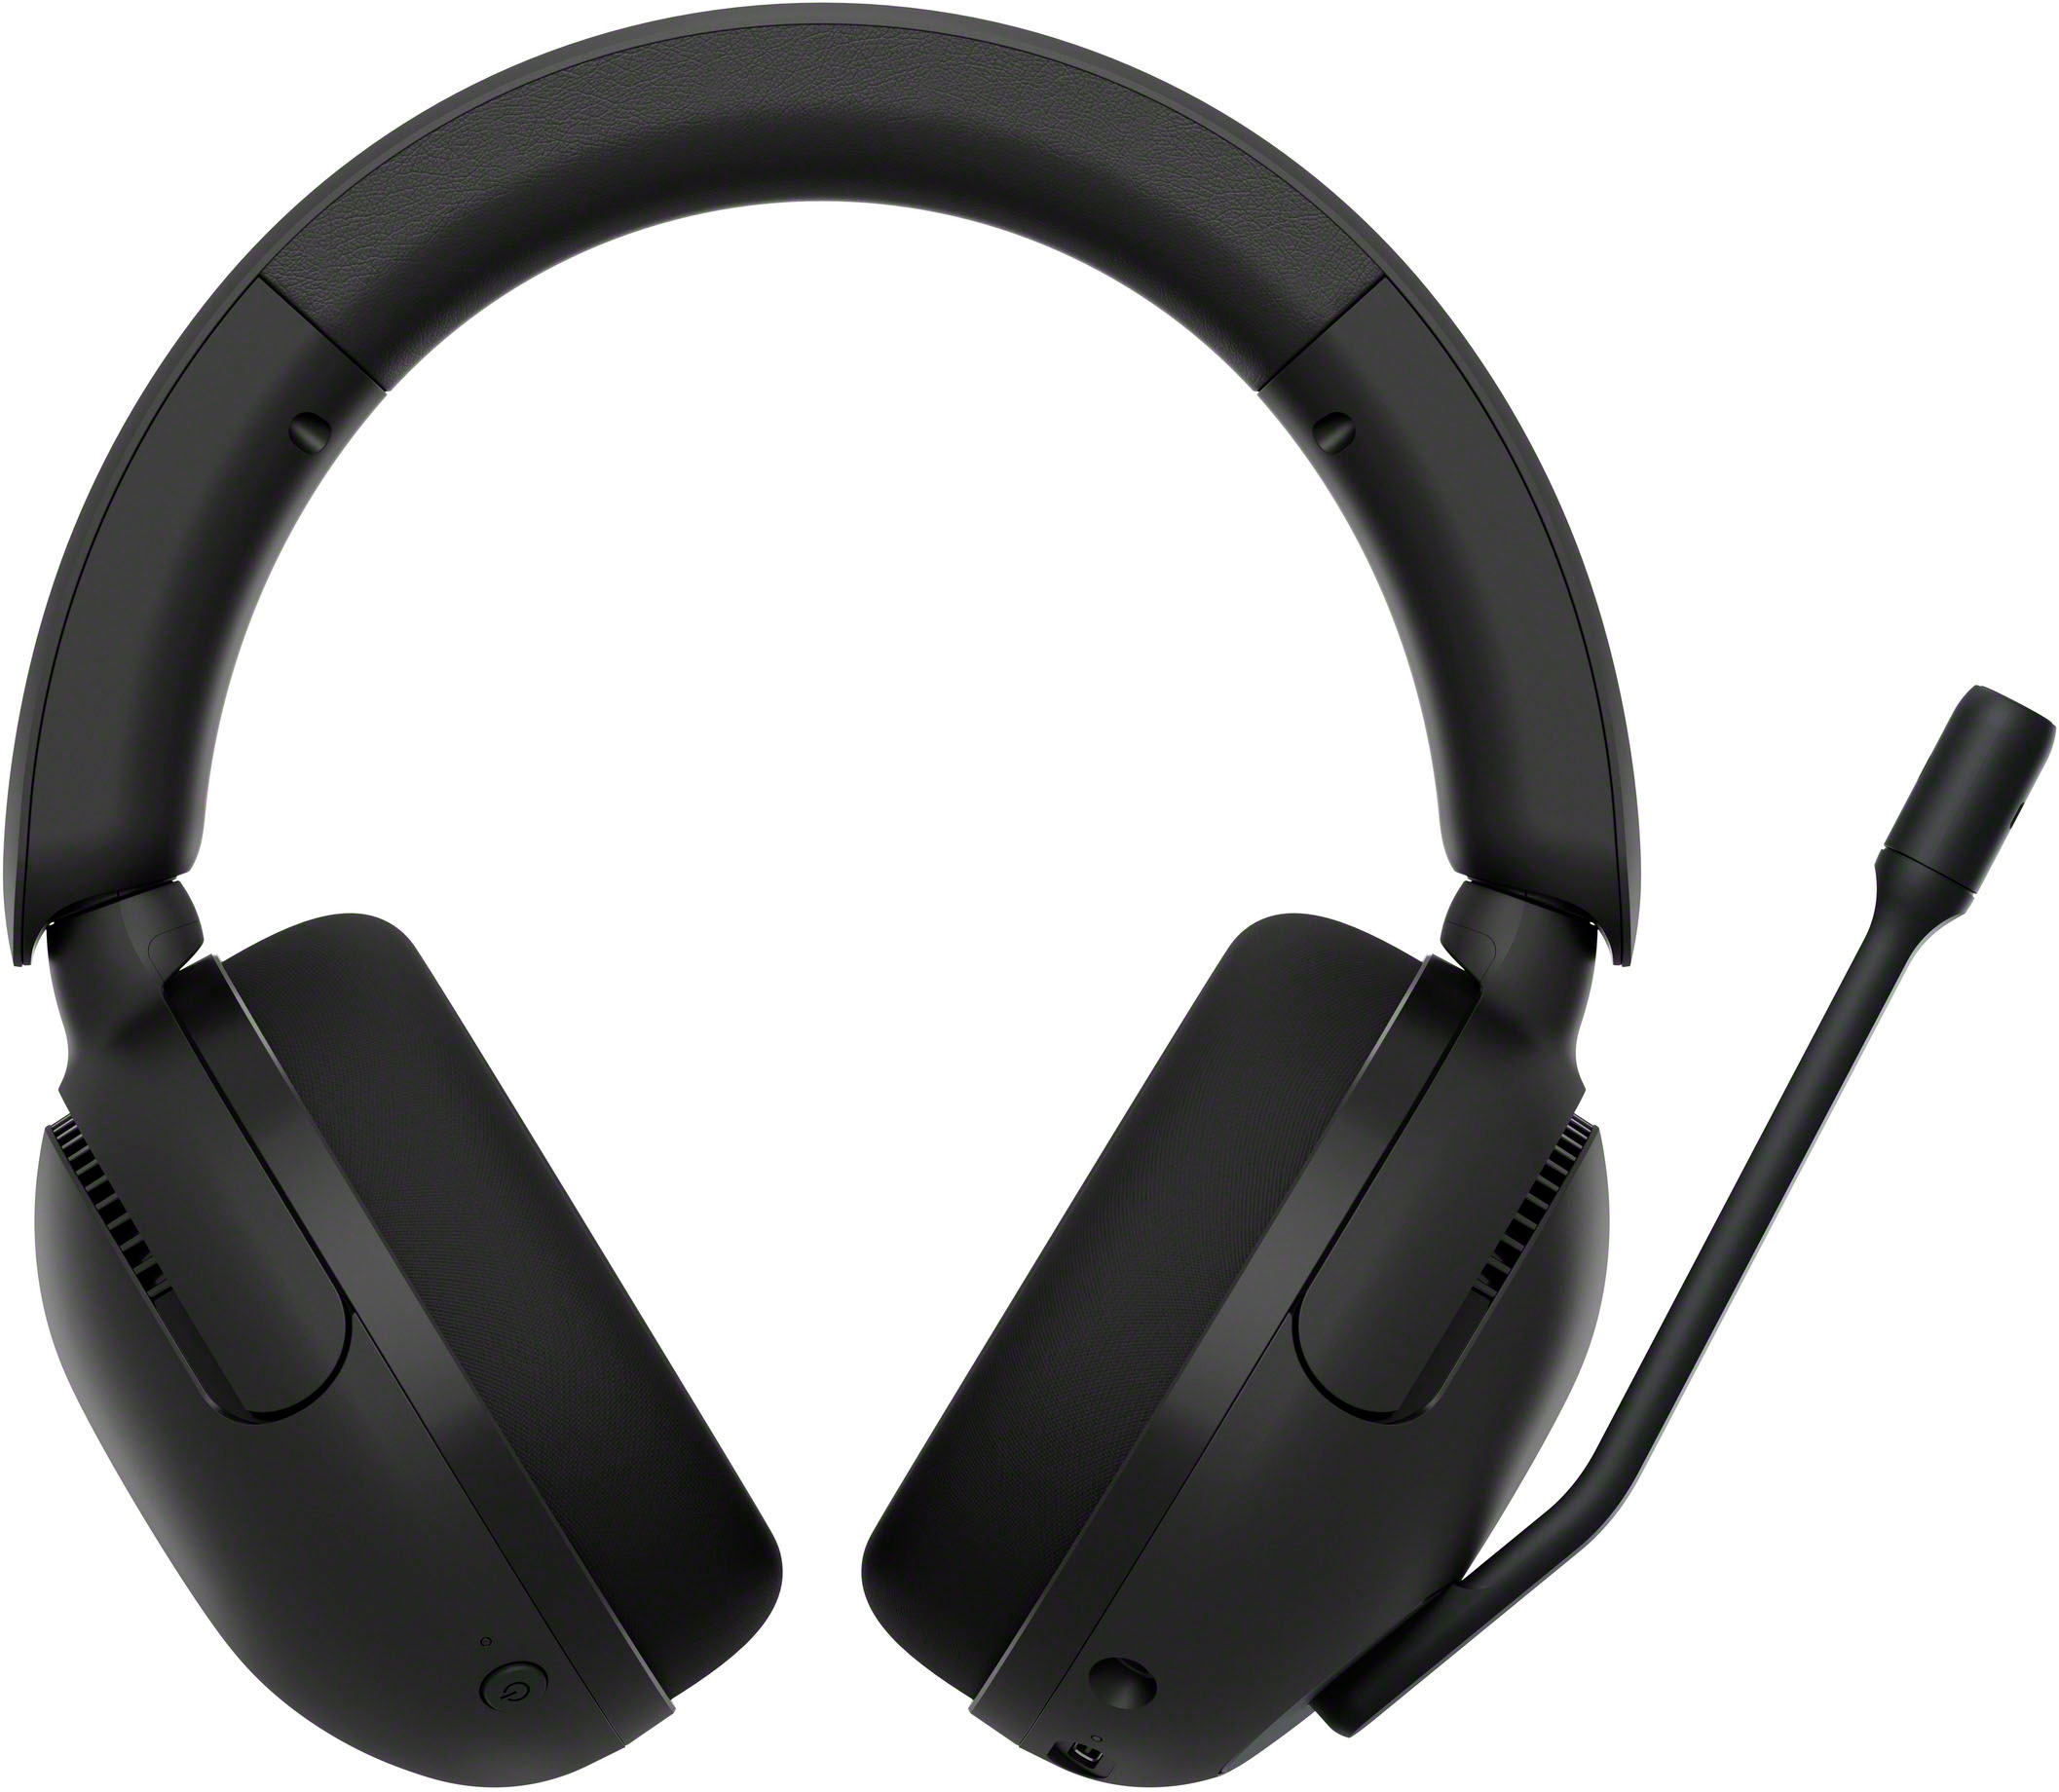 Sony's wireless gaming headset 'INZONE H9 / H7' can also Discord